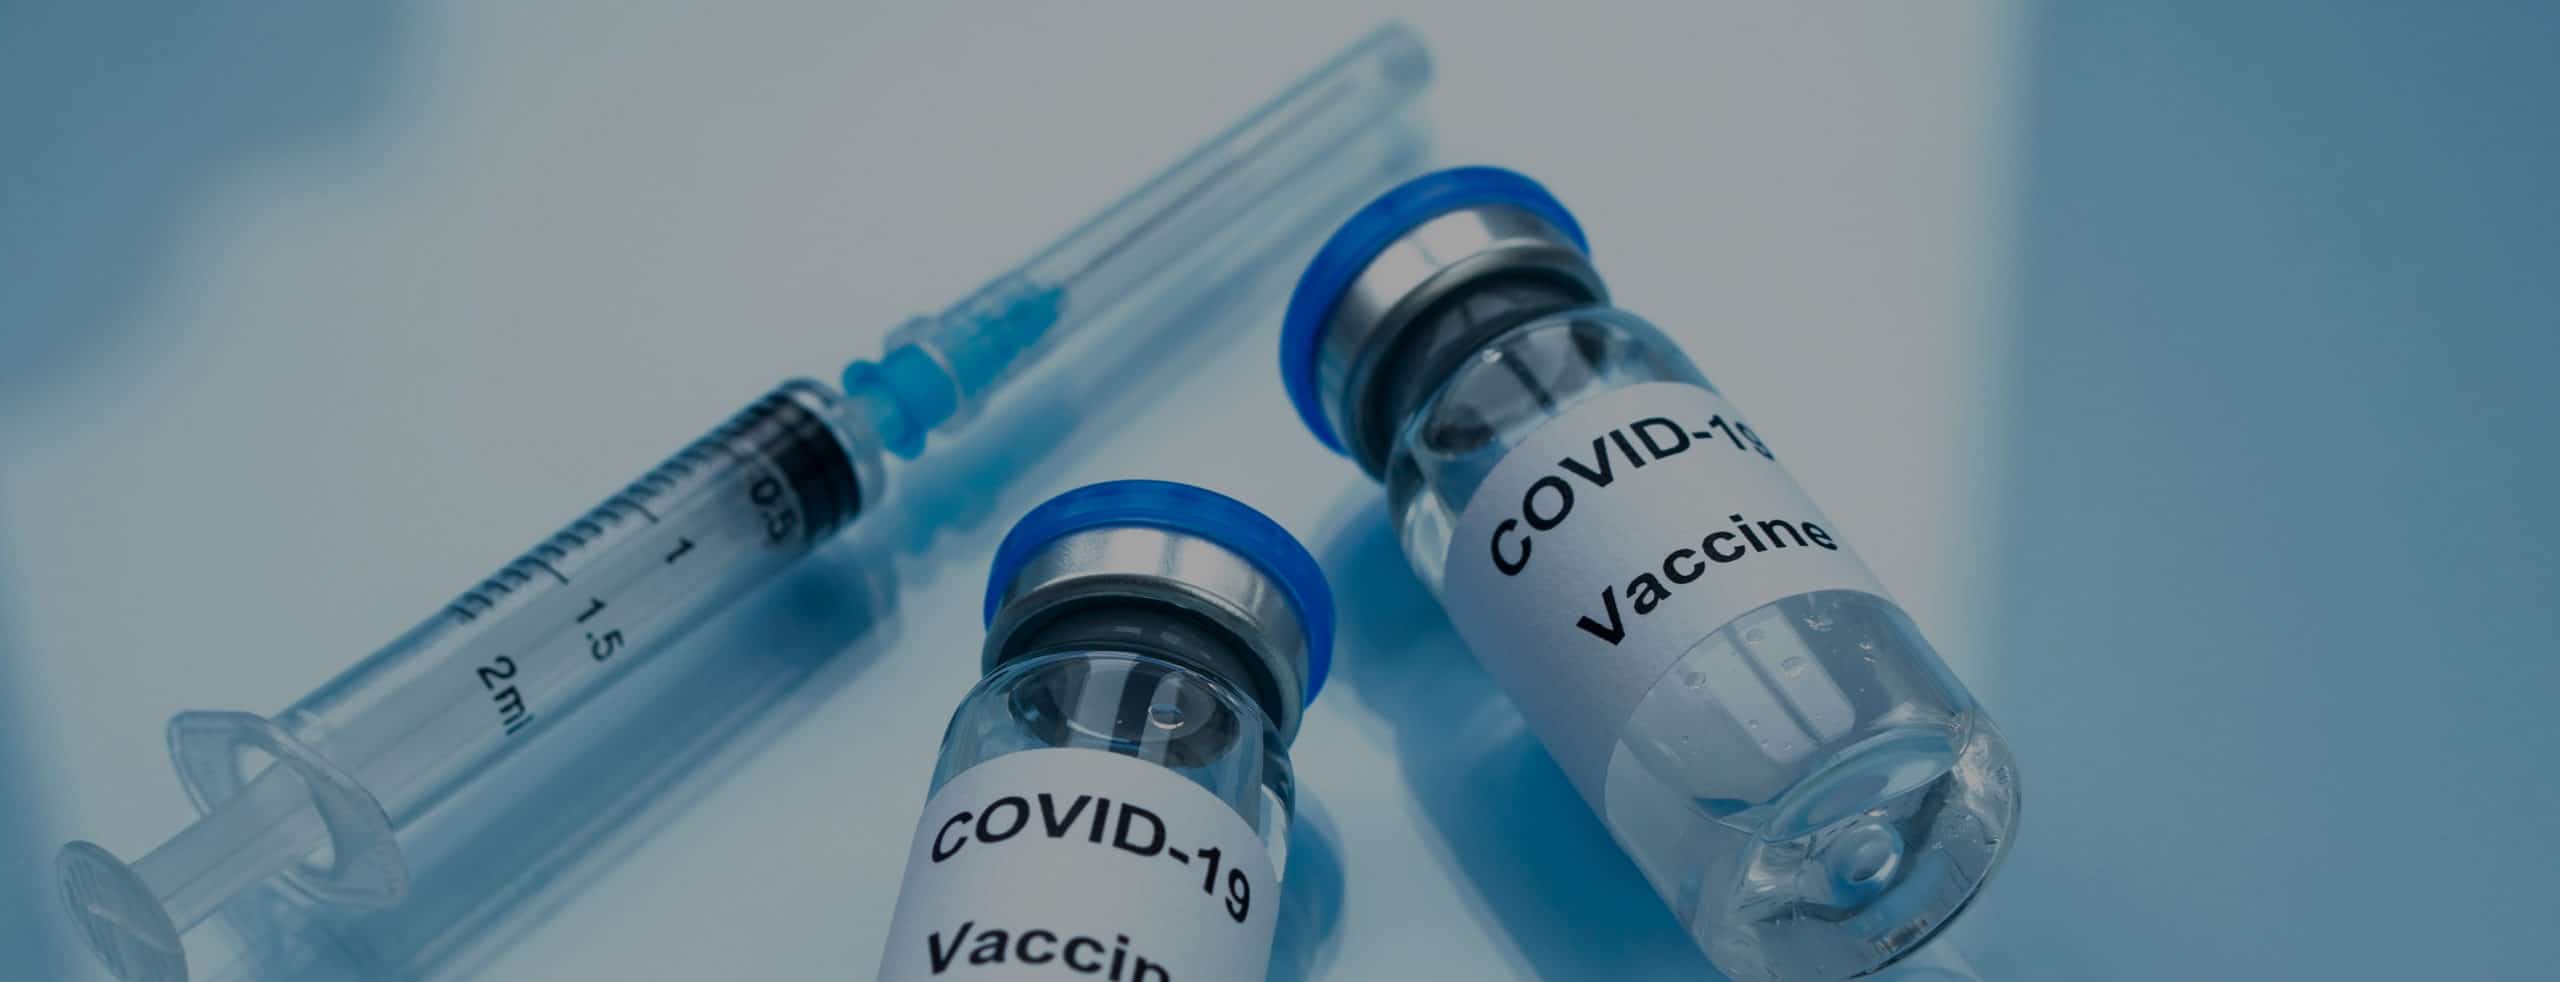 F.I.T.T. Ministry COVID-19 Vaccine Information